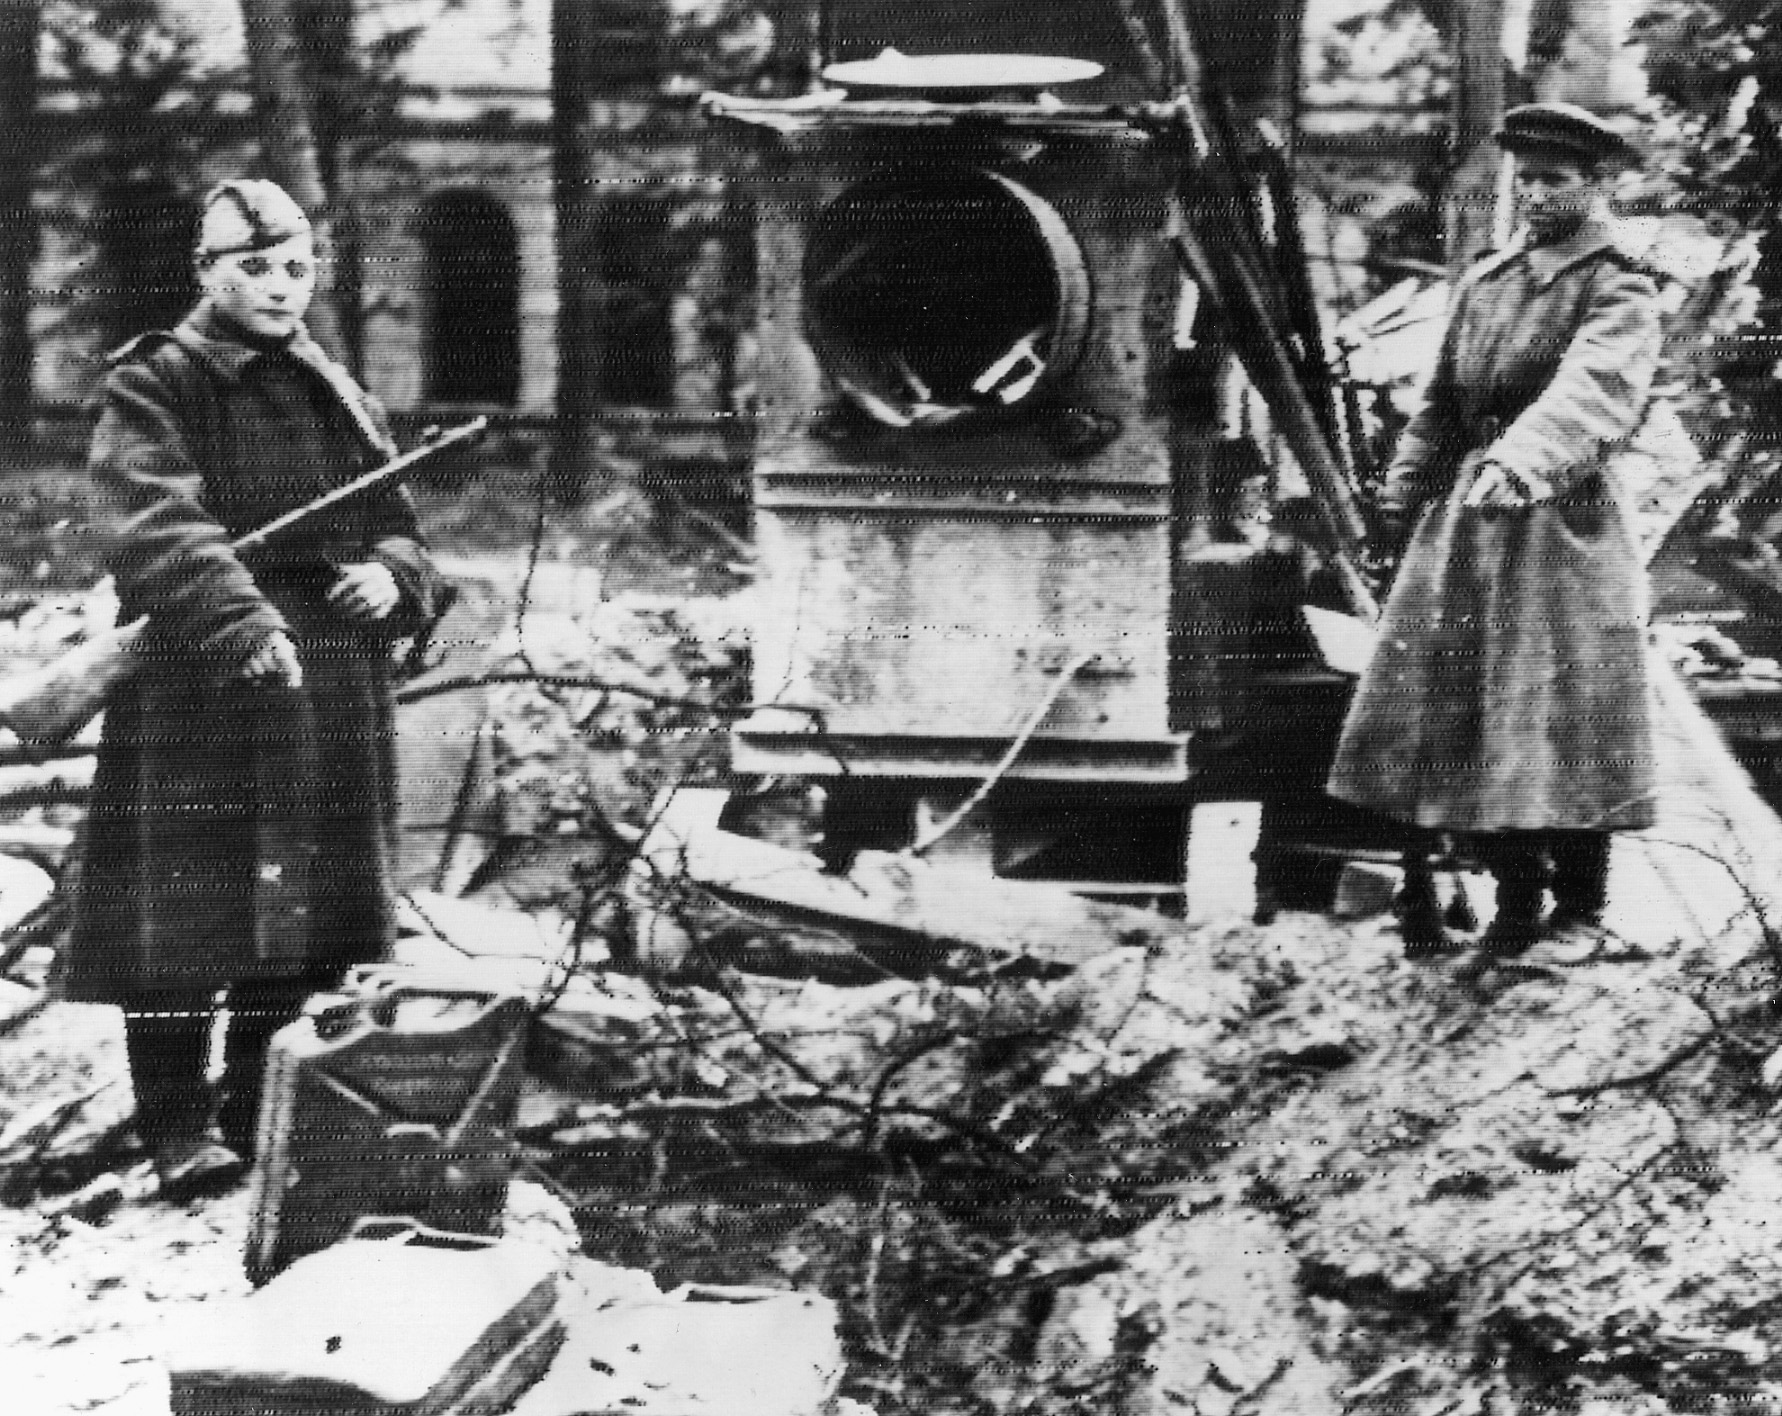 Two Russian soldiers motion towards the place in the Führerbunker garden where the bodies of Hitler and Eva Braun were doused with gasoline and set afire.